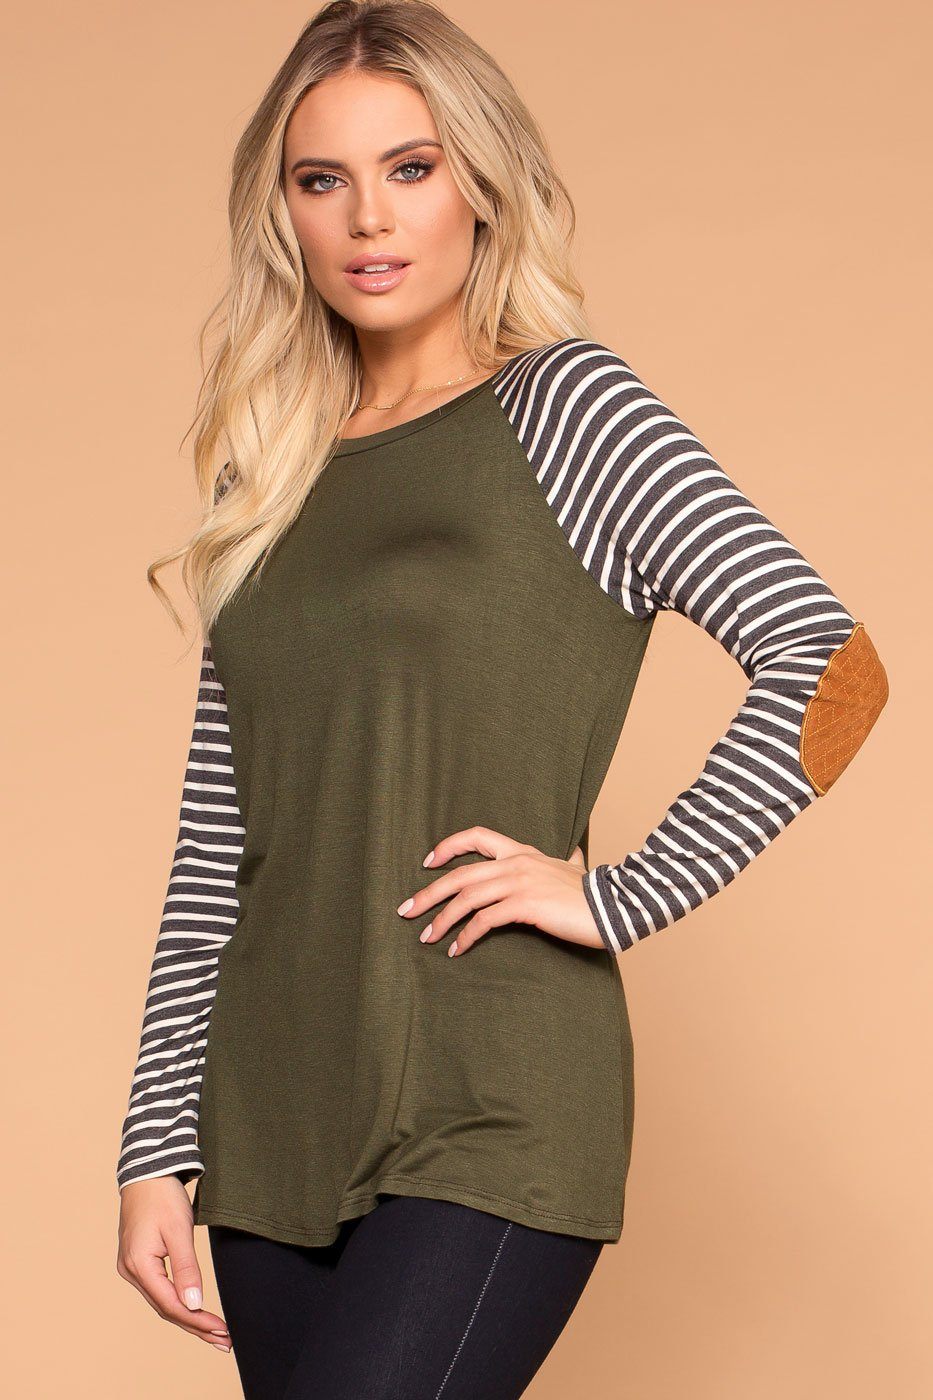 womens striped top with elbow patches for sale